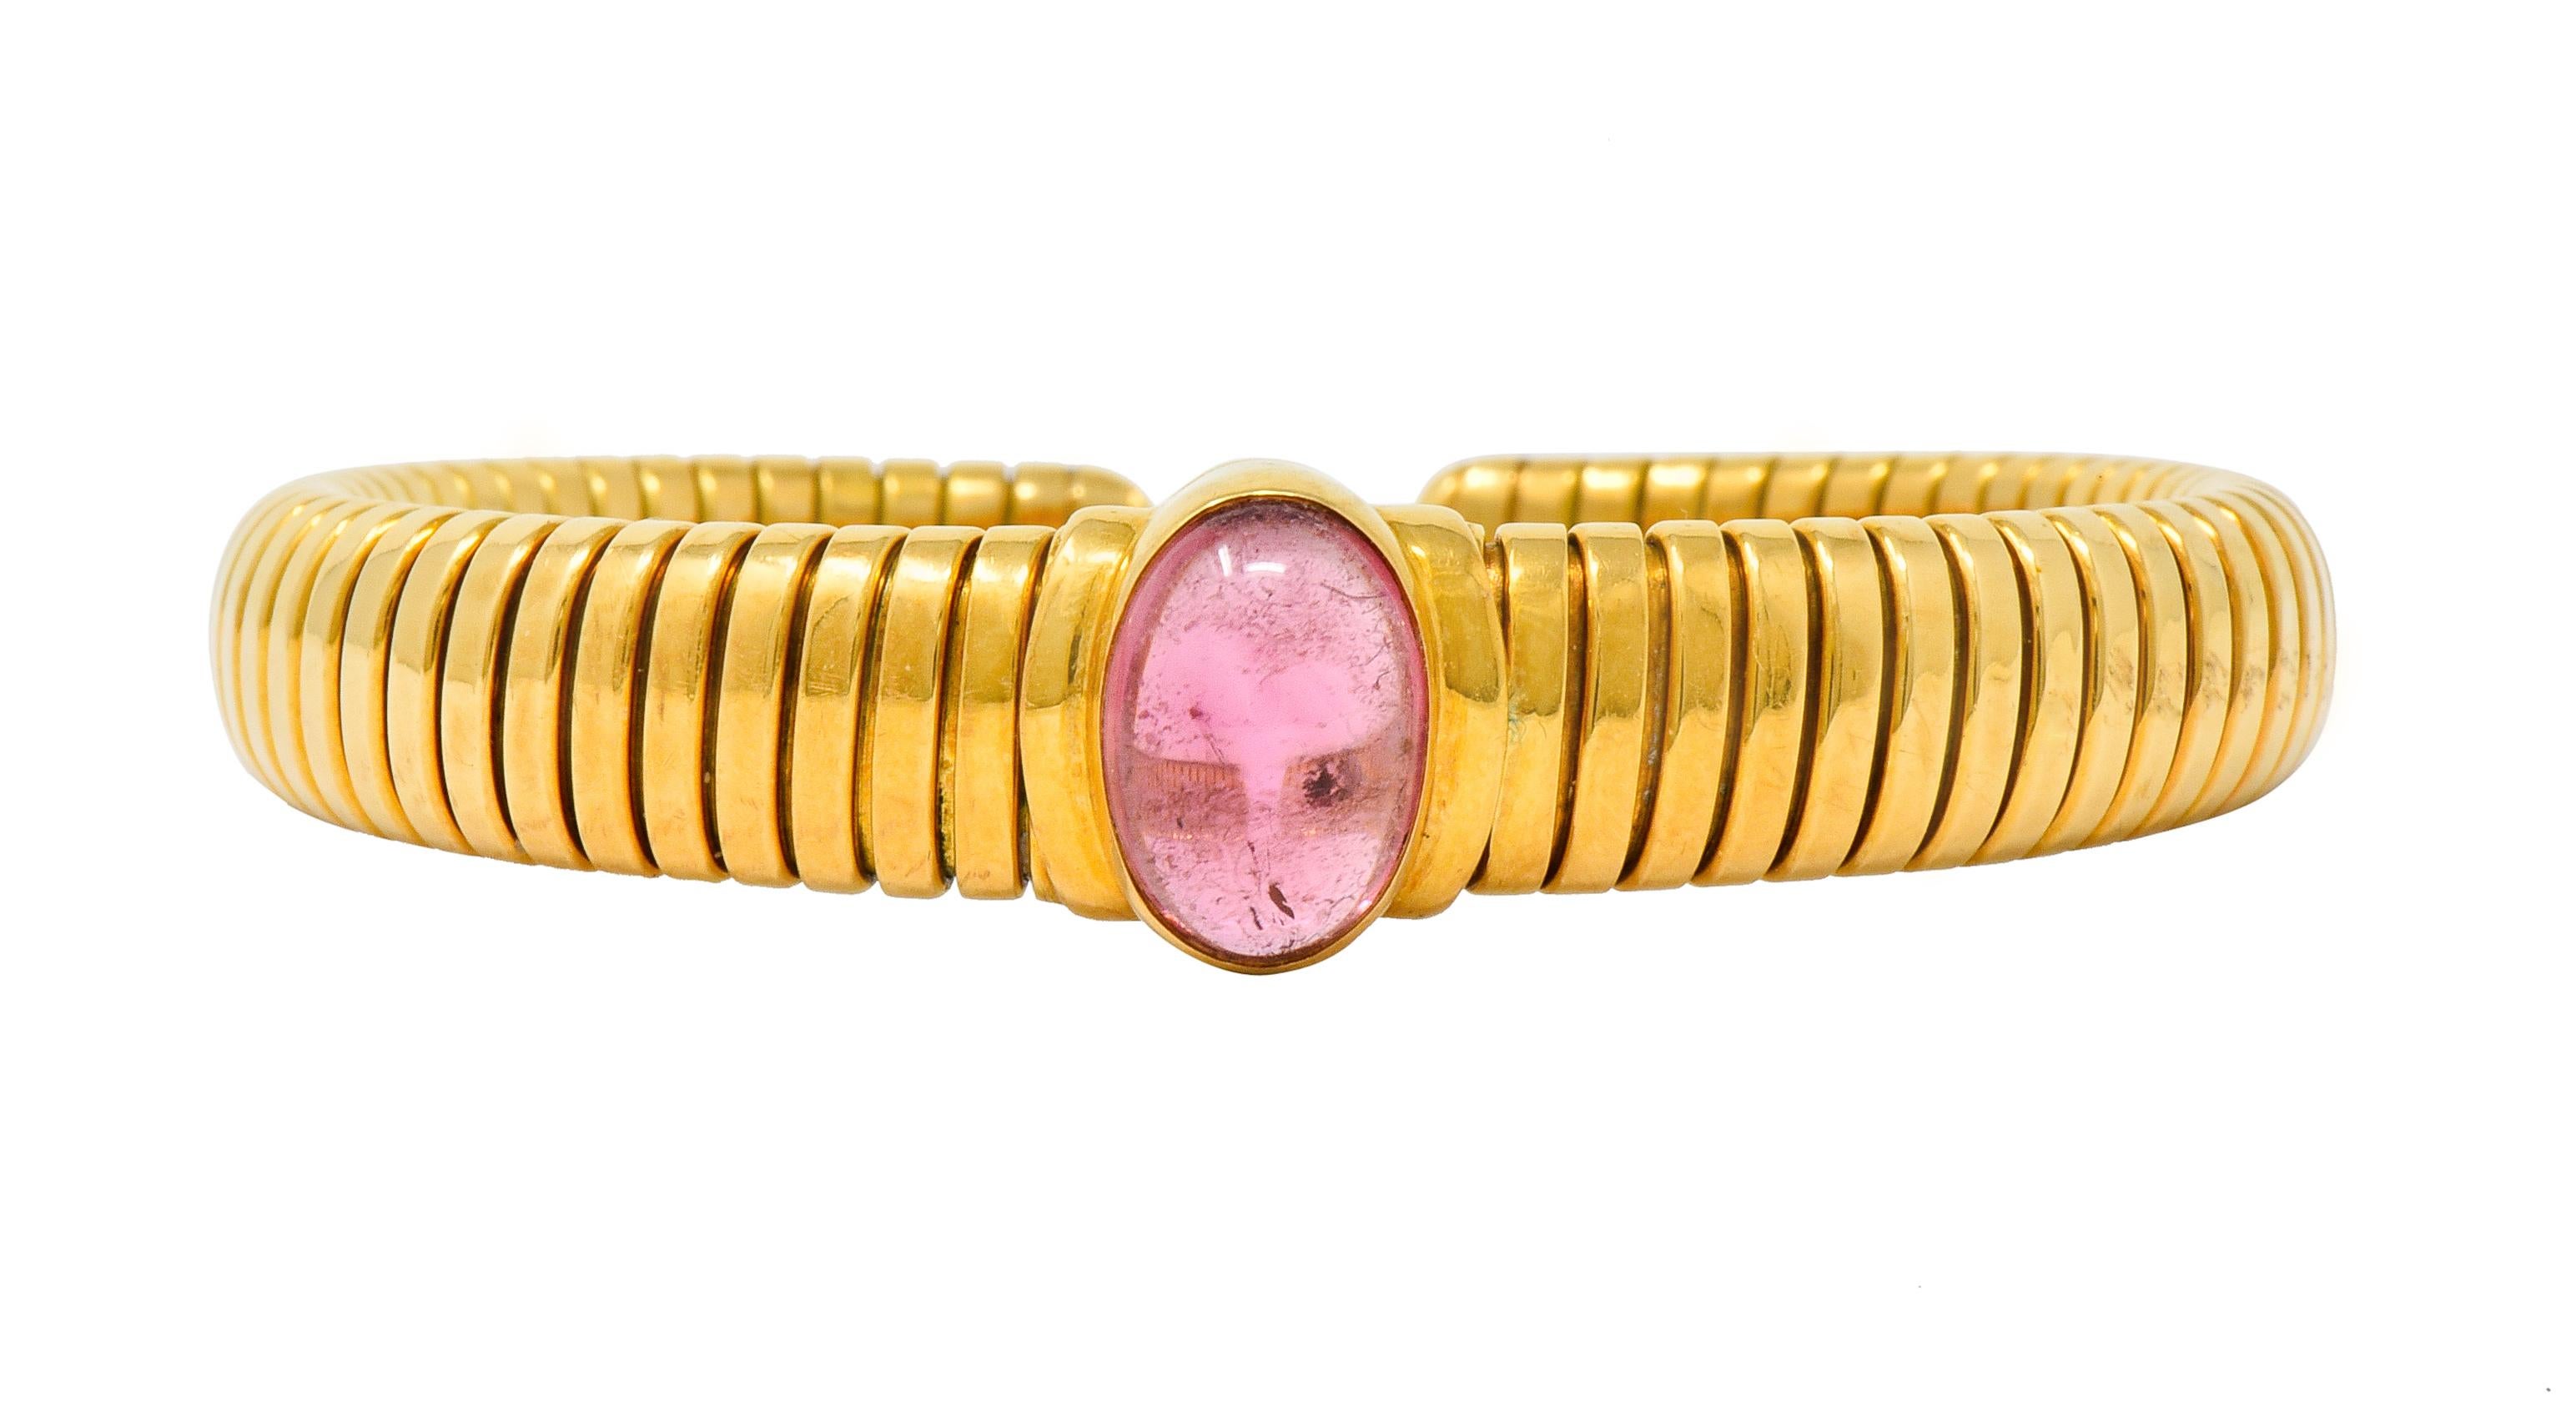 Cuff style bracelet designed with iconic tubogas technology, deeply ribbed with a flexible fit

Centering a bezel set oval tourmaline cabochon measuring approximately 12.0 x 8.5 mm

A very saturated pink color, transparent with some natural